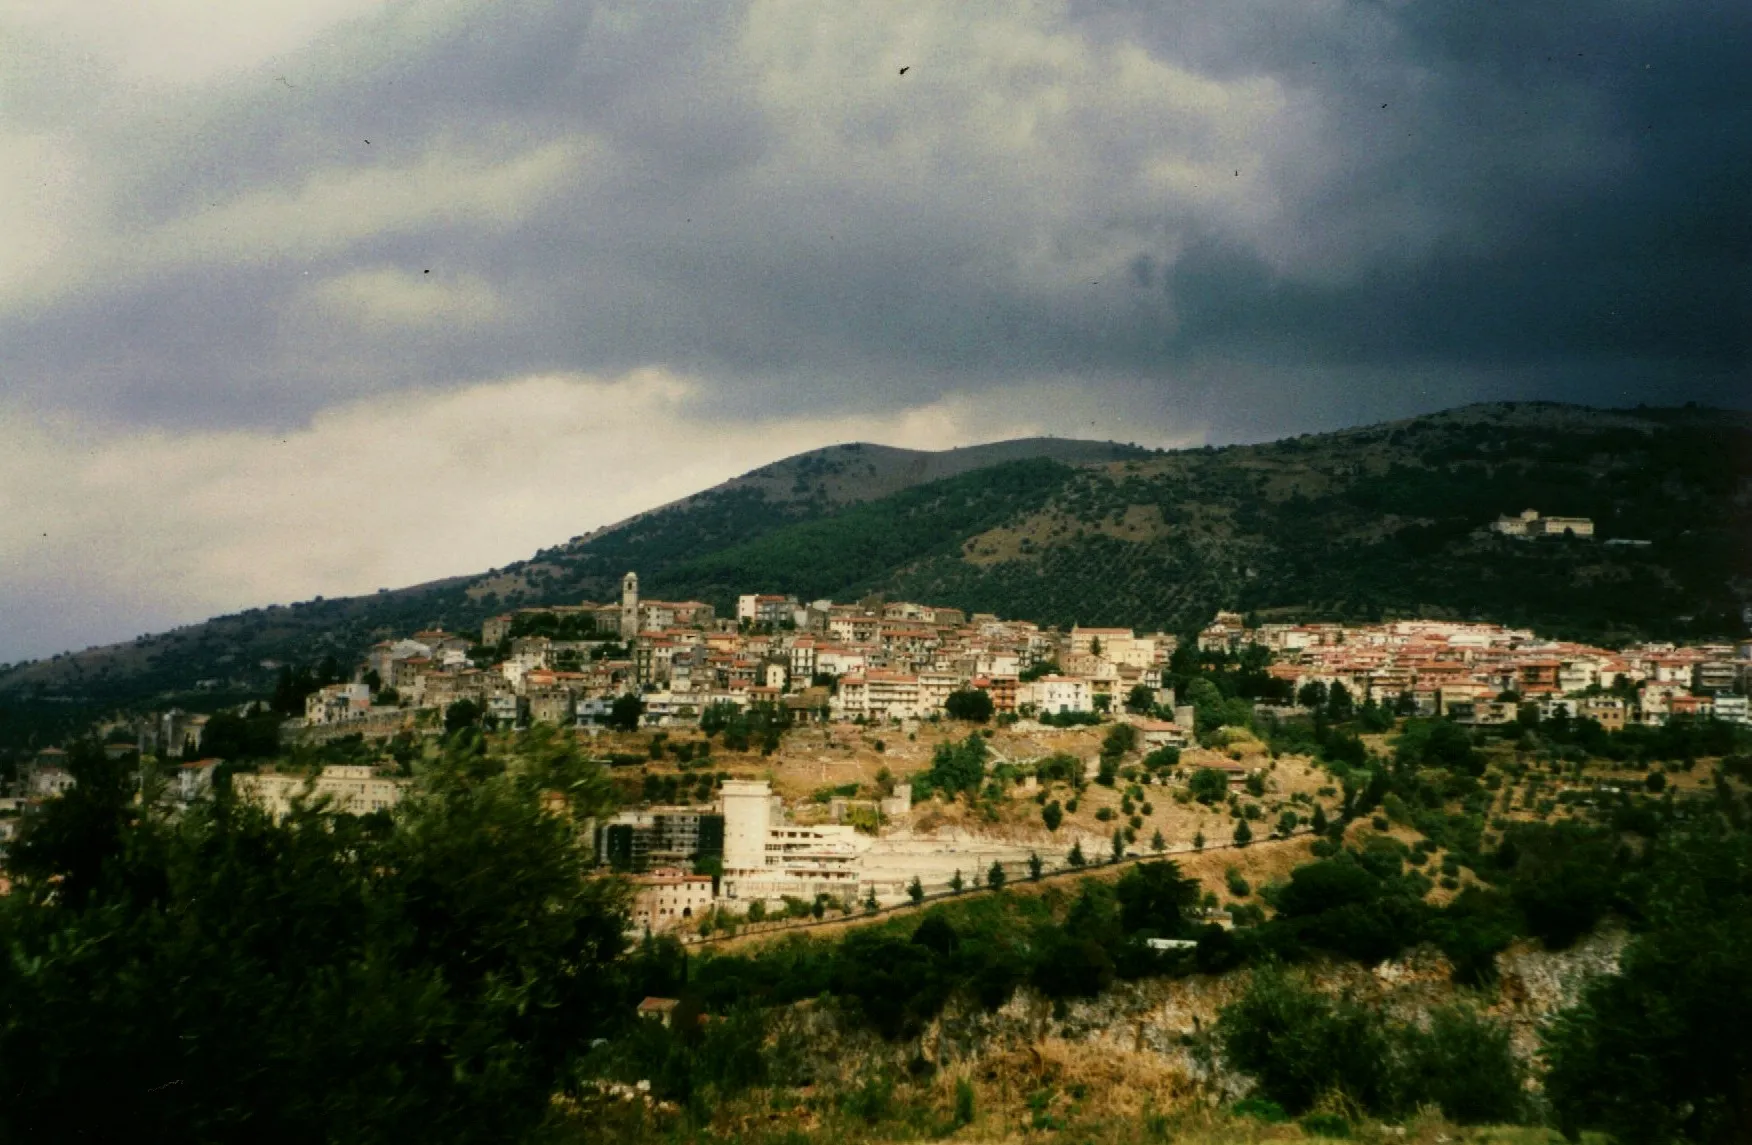 Photo showing: Photo of town centre from a ringing road. The village monastery is visible in the top right of the photo, watching over the town from its elevated perch on the mountain.